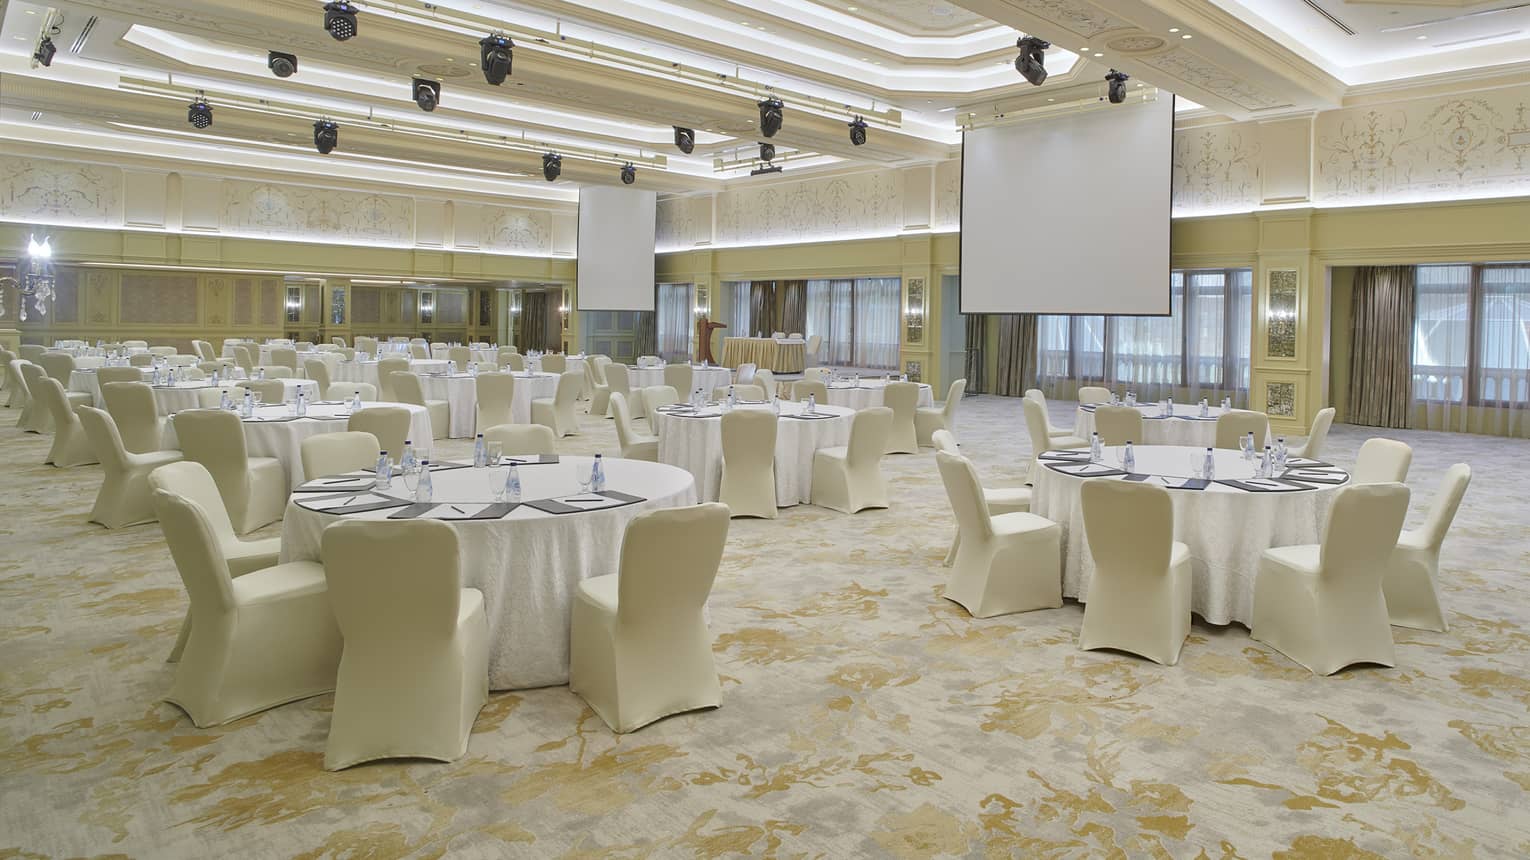 Large, neutrally decorated meeting room with vaulted lit ceiling, two rear screens and banquet seating